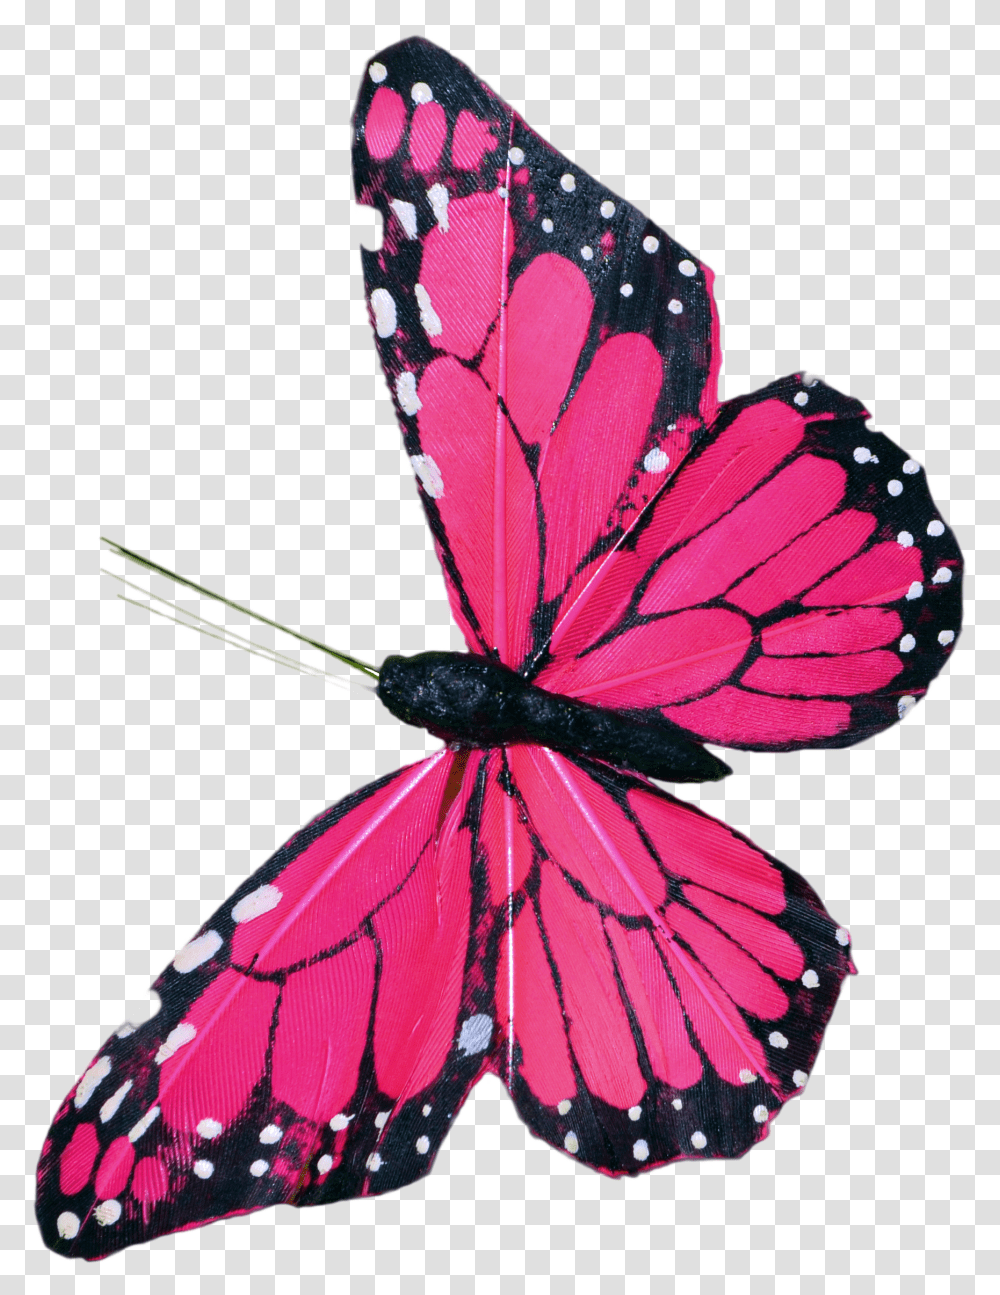 Pink Butterfly Clip Art Pink Butterfly Flying, Insect, Invertebrate, Animal, Monarch Transparent Png